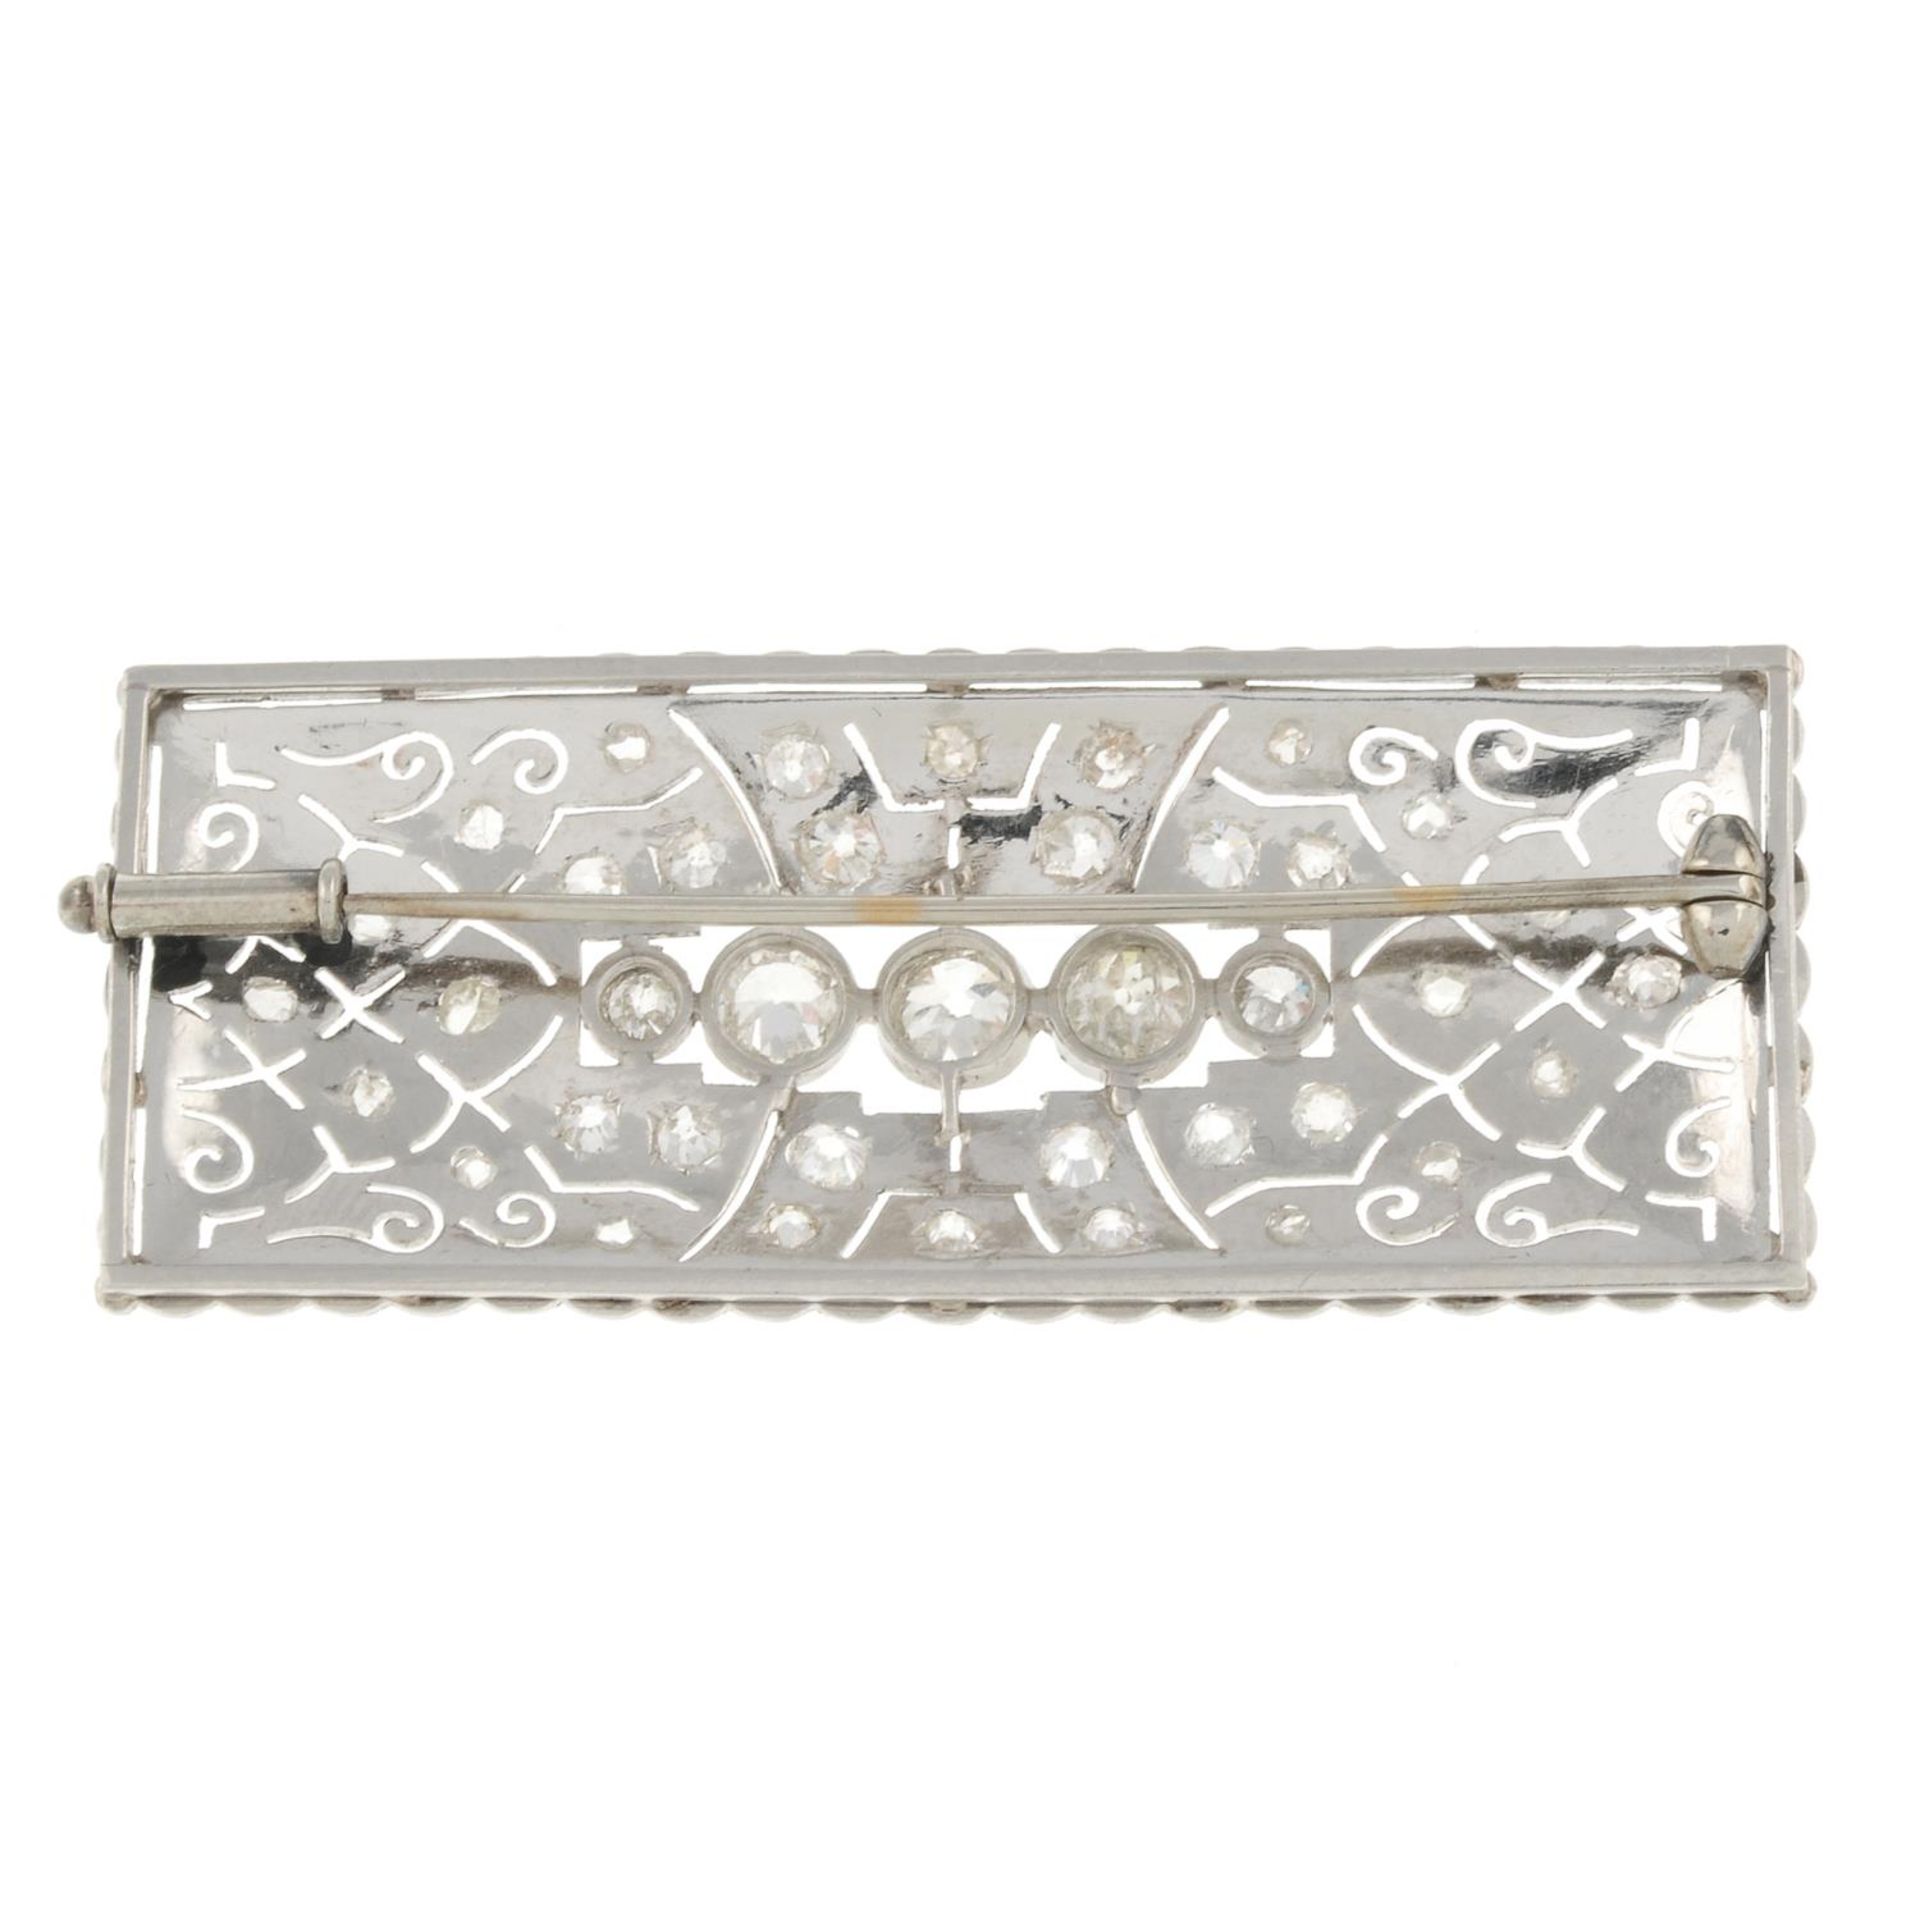 An early 20th century platinum old and rose-cut diamond brooch. - Image 2 of 2